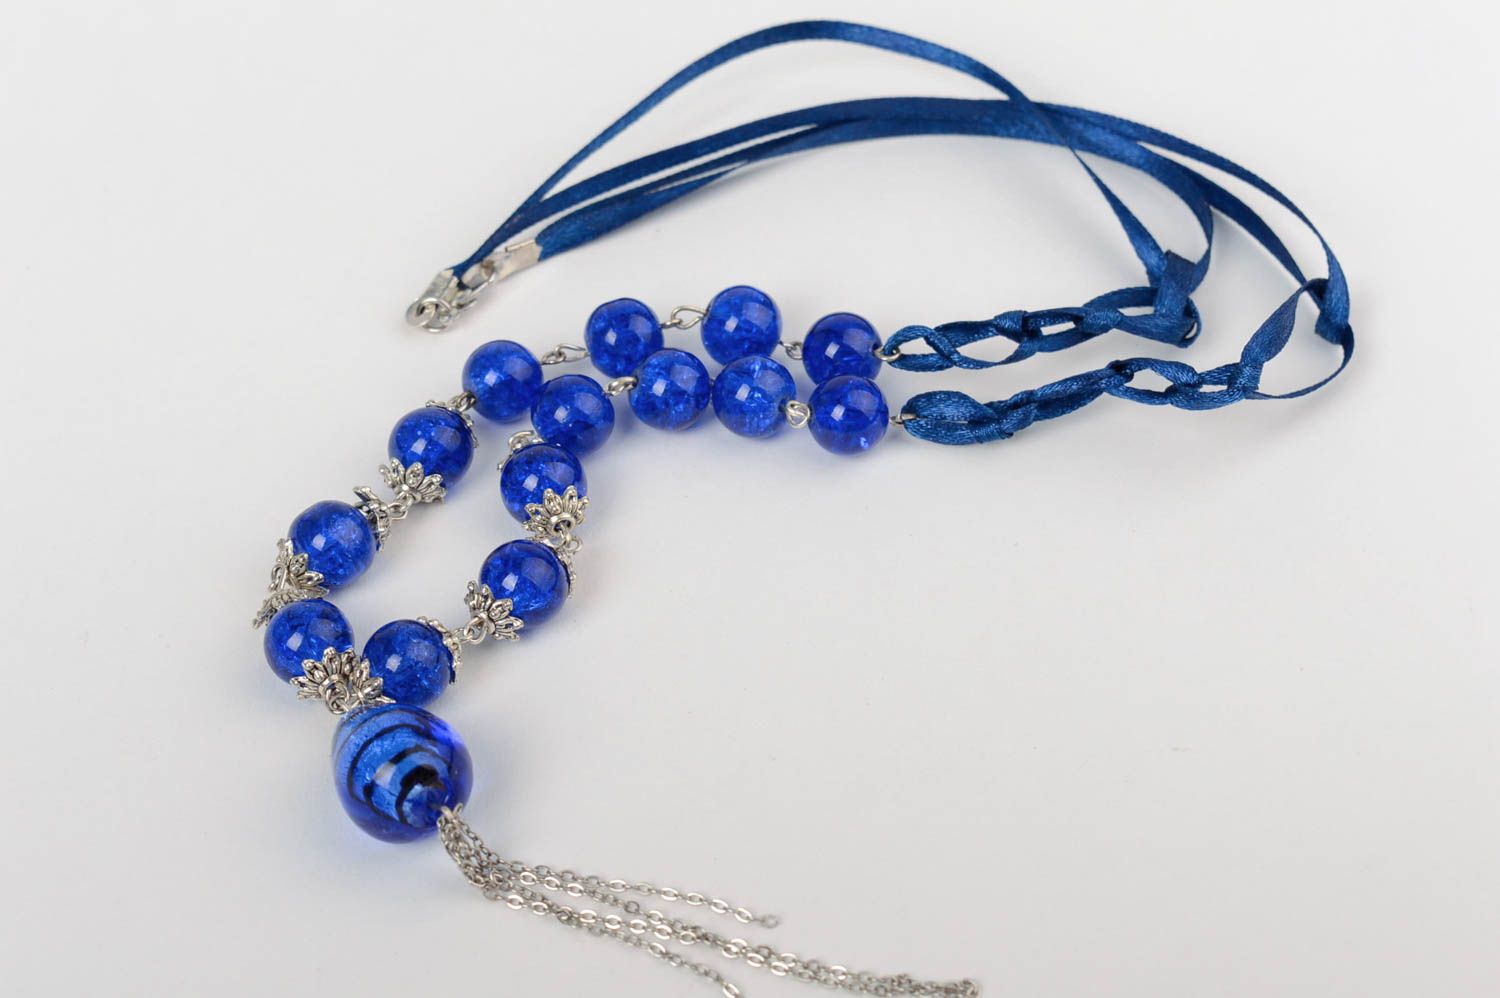 Handmade deep blue designer necklace with glass beads on satin ribbon photo 3